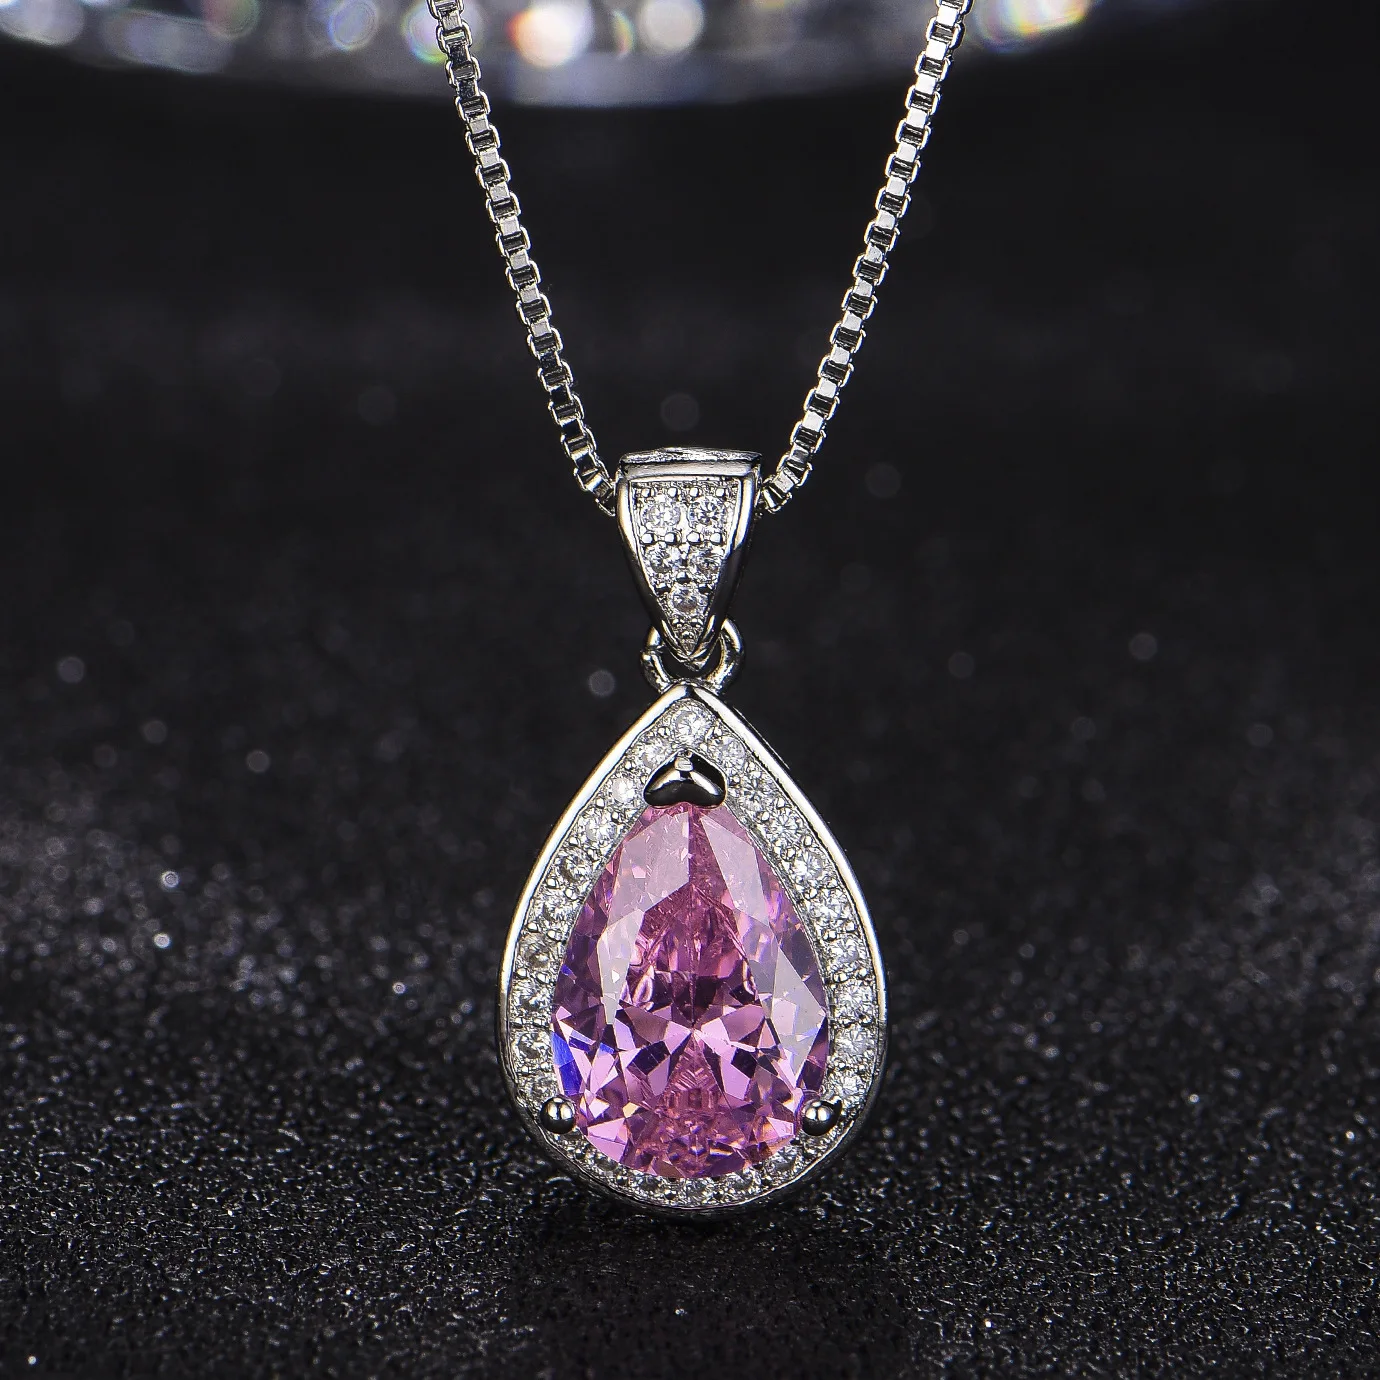 Women's Popular Jewelry ruby White CZ Silver Yellow Pendant Chain Necklace 